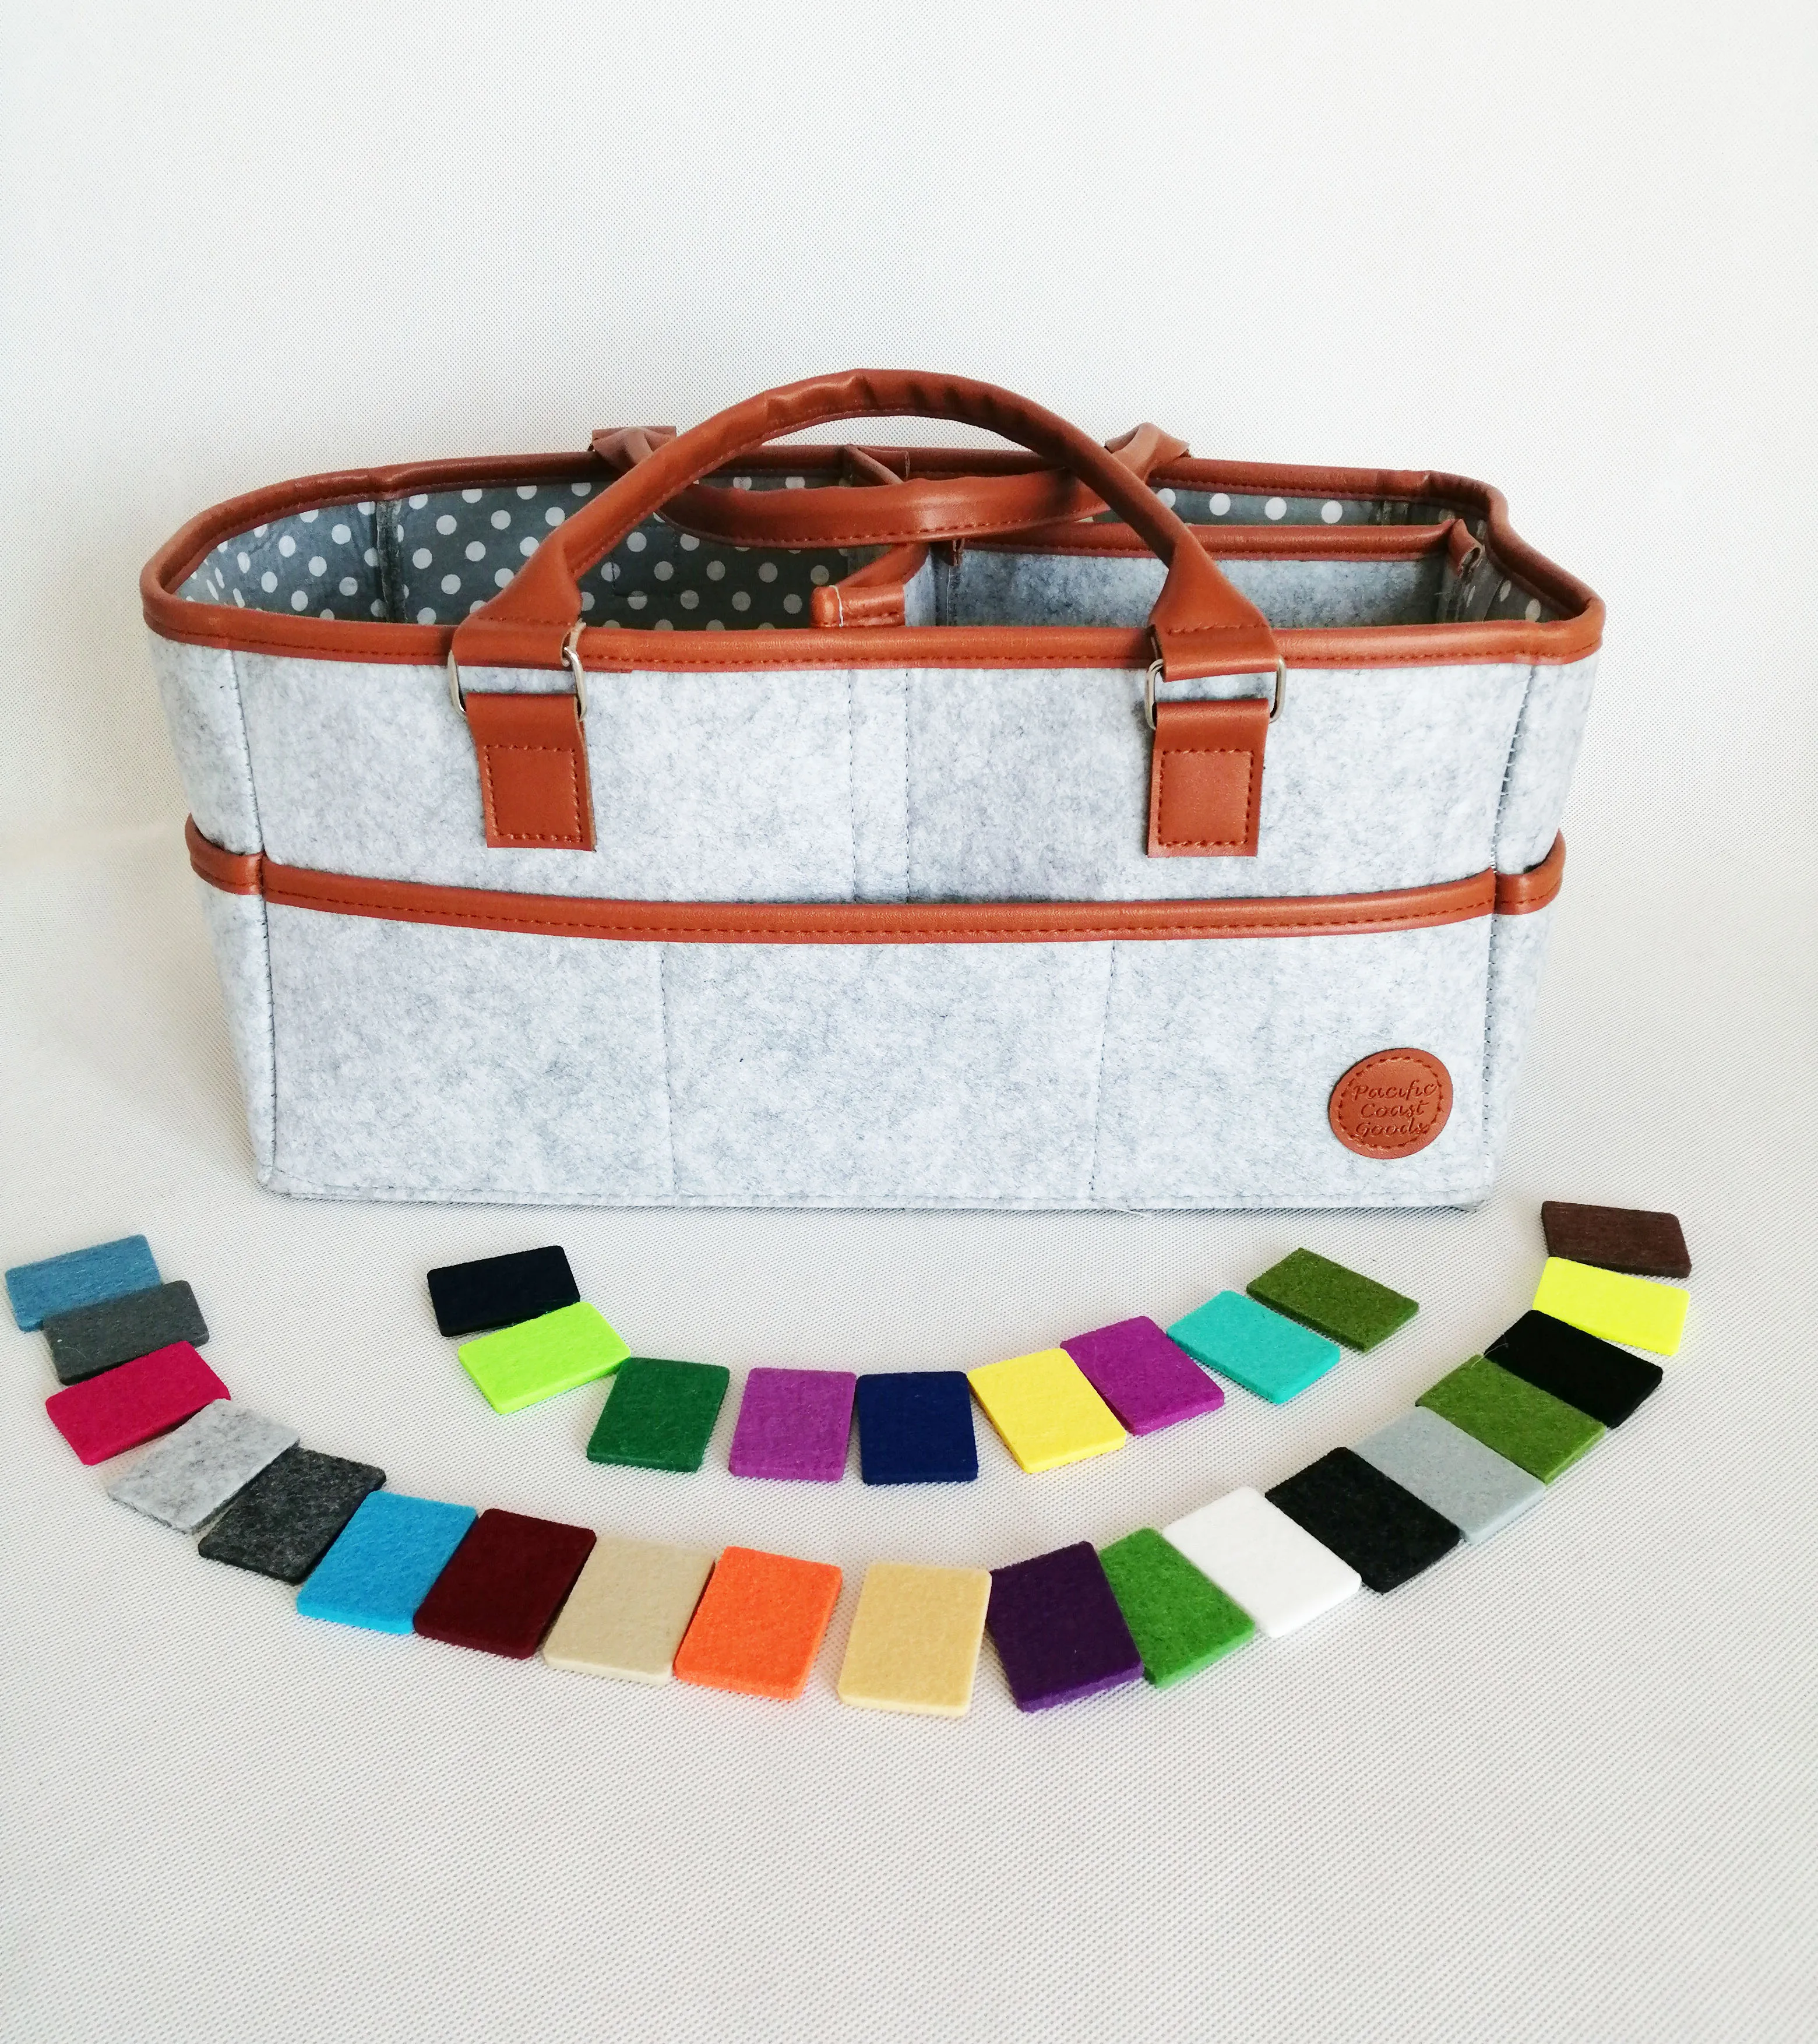 

Baby Diaper Caddy - Nursery Storage Bin and Car Organizer for Diapers and Baby Wipes, Customized colors